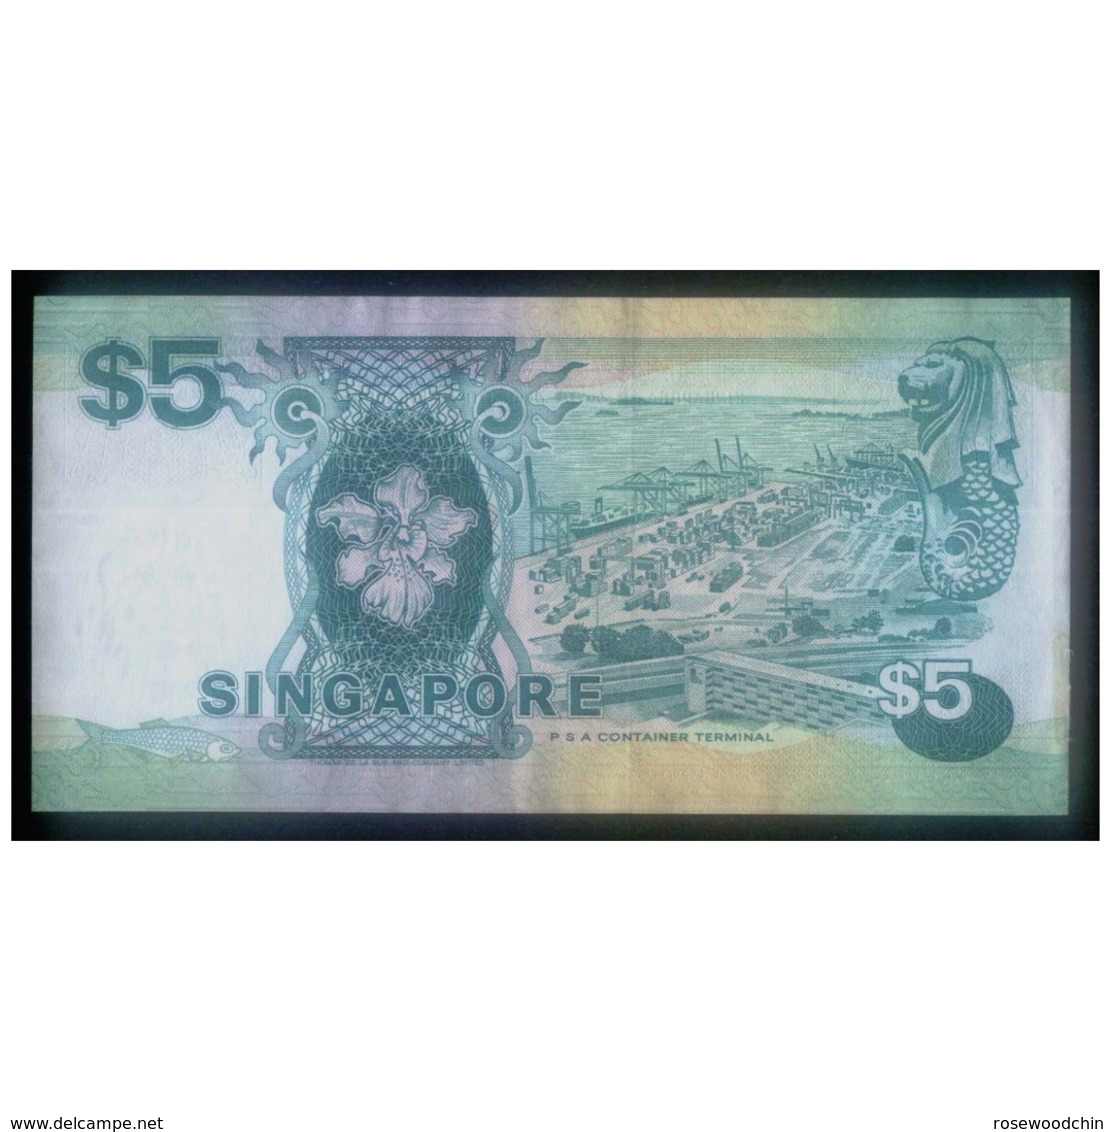 RARE ! Singapore Ship Series $5 HTT Sign W/ Seal CURRENCY MONEY BANKNOTE (#45) - Singapur